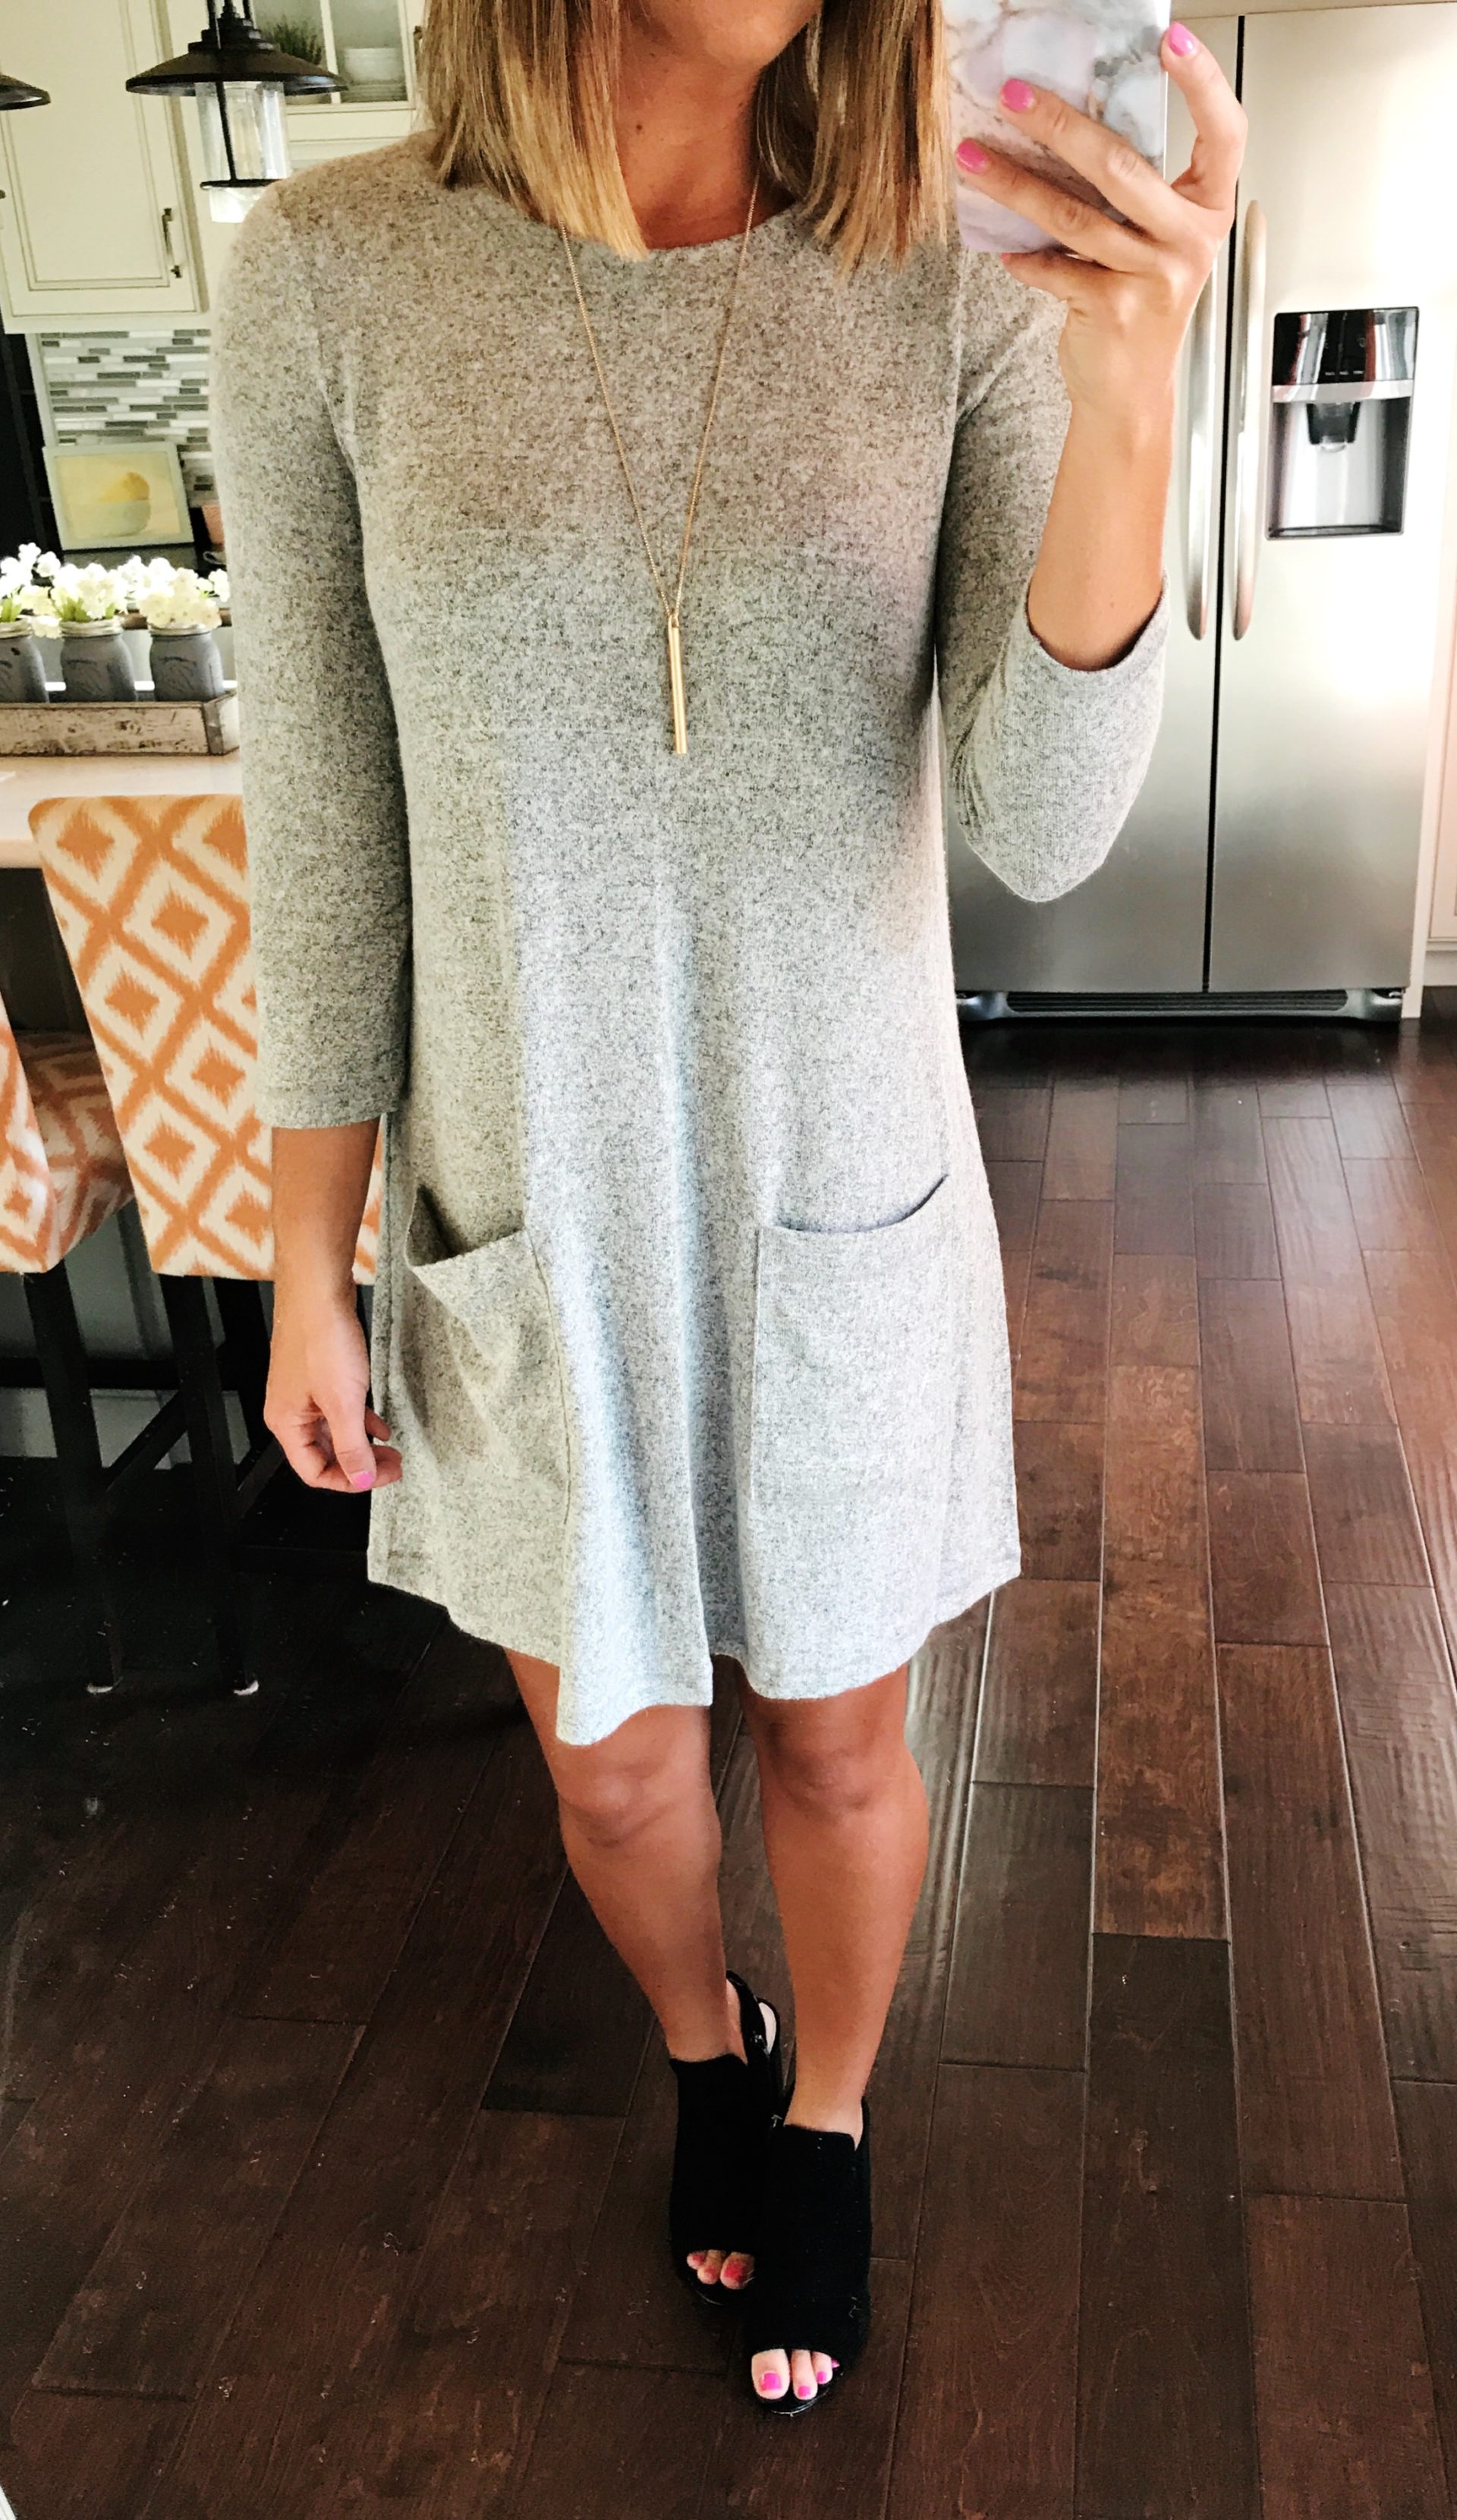 How to style a swing dress for Fall